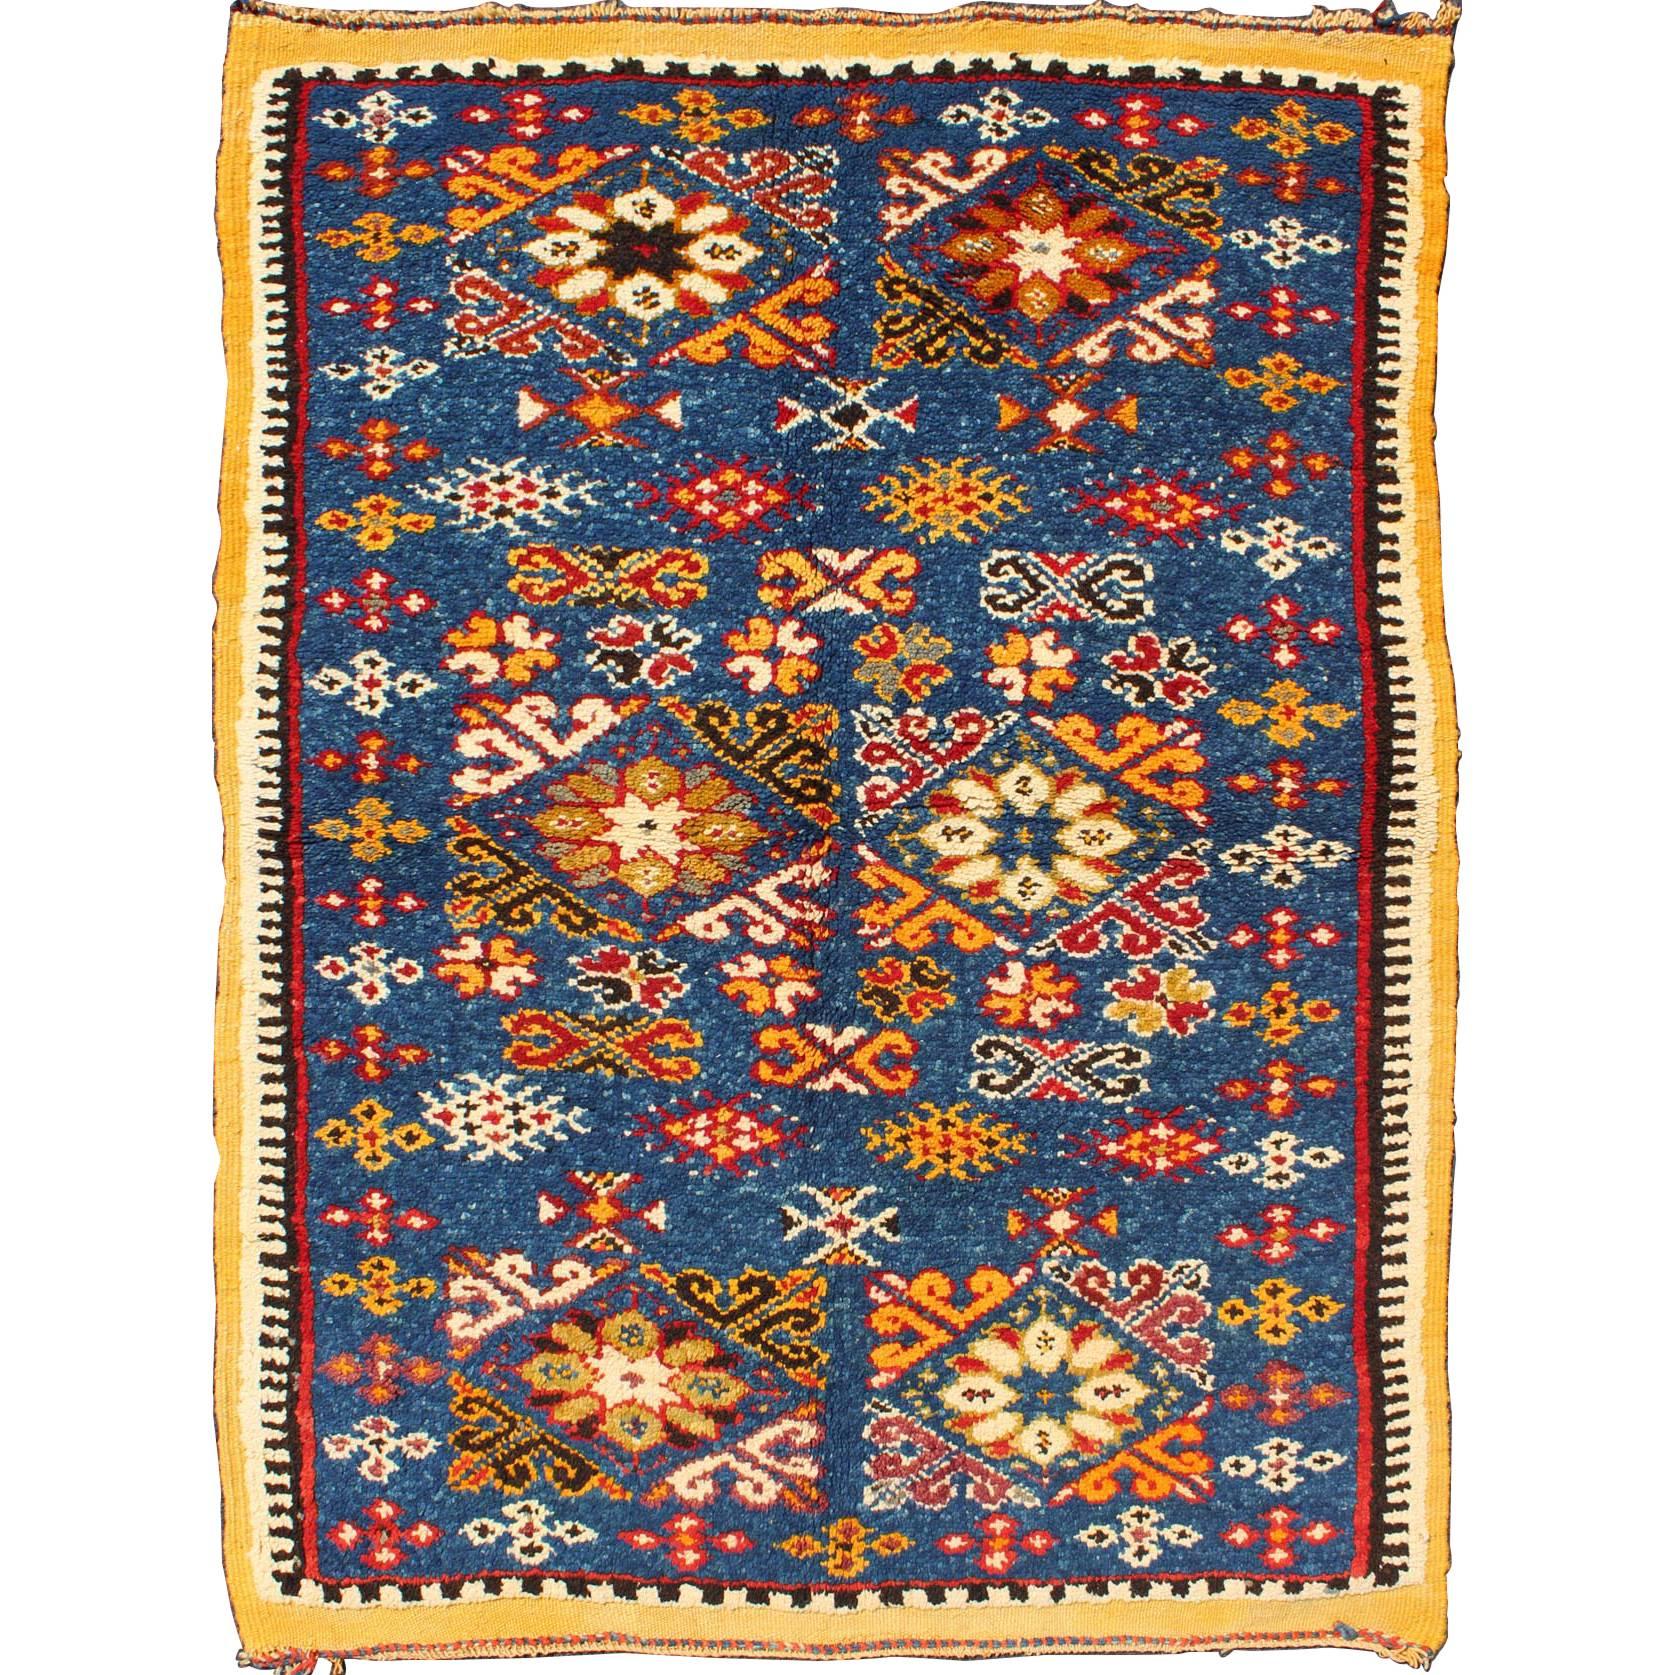 Vintage Moroccan Rug with Bright Blue Field and Colorful Geometric Motifs